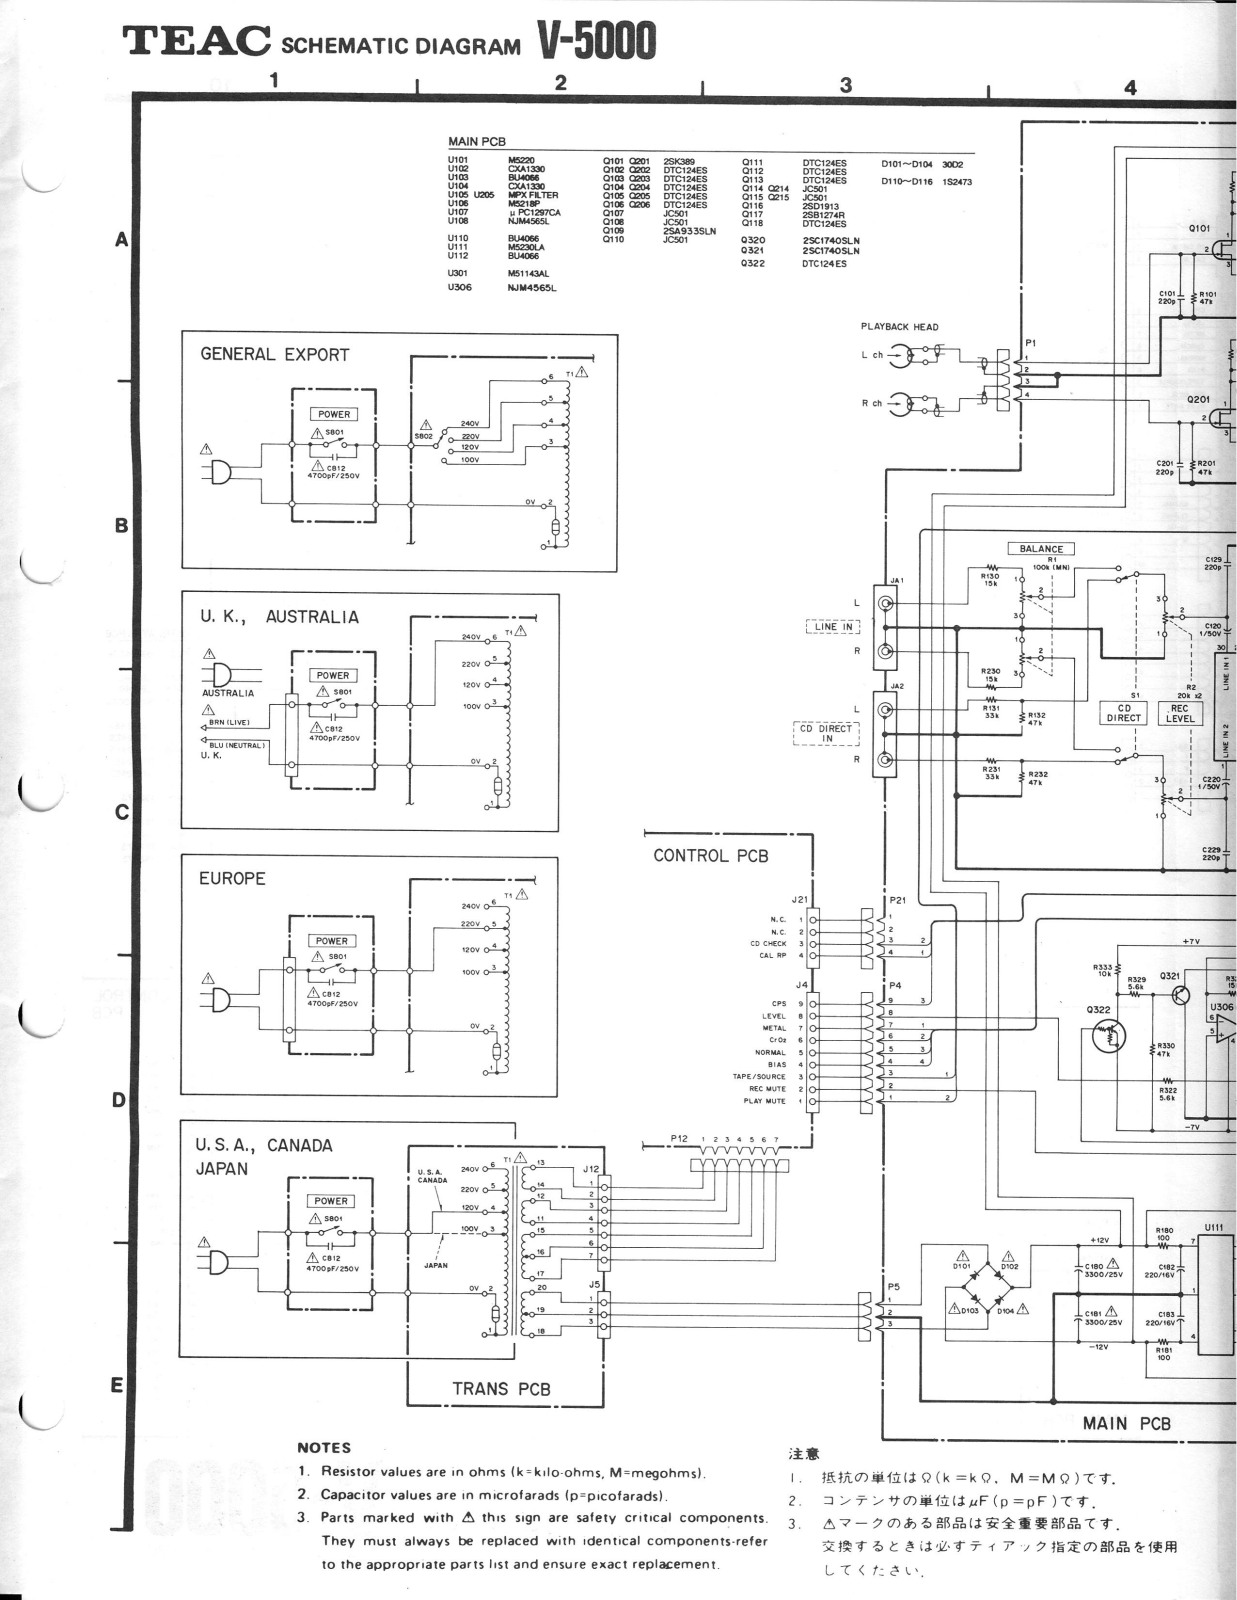 Teac V-5000 Schematic